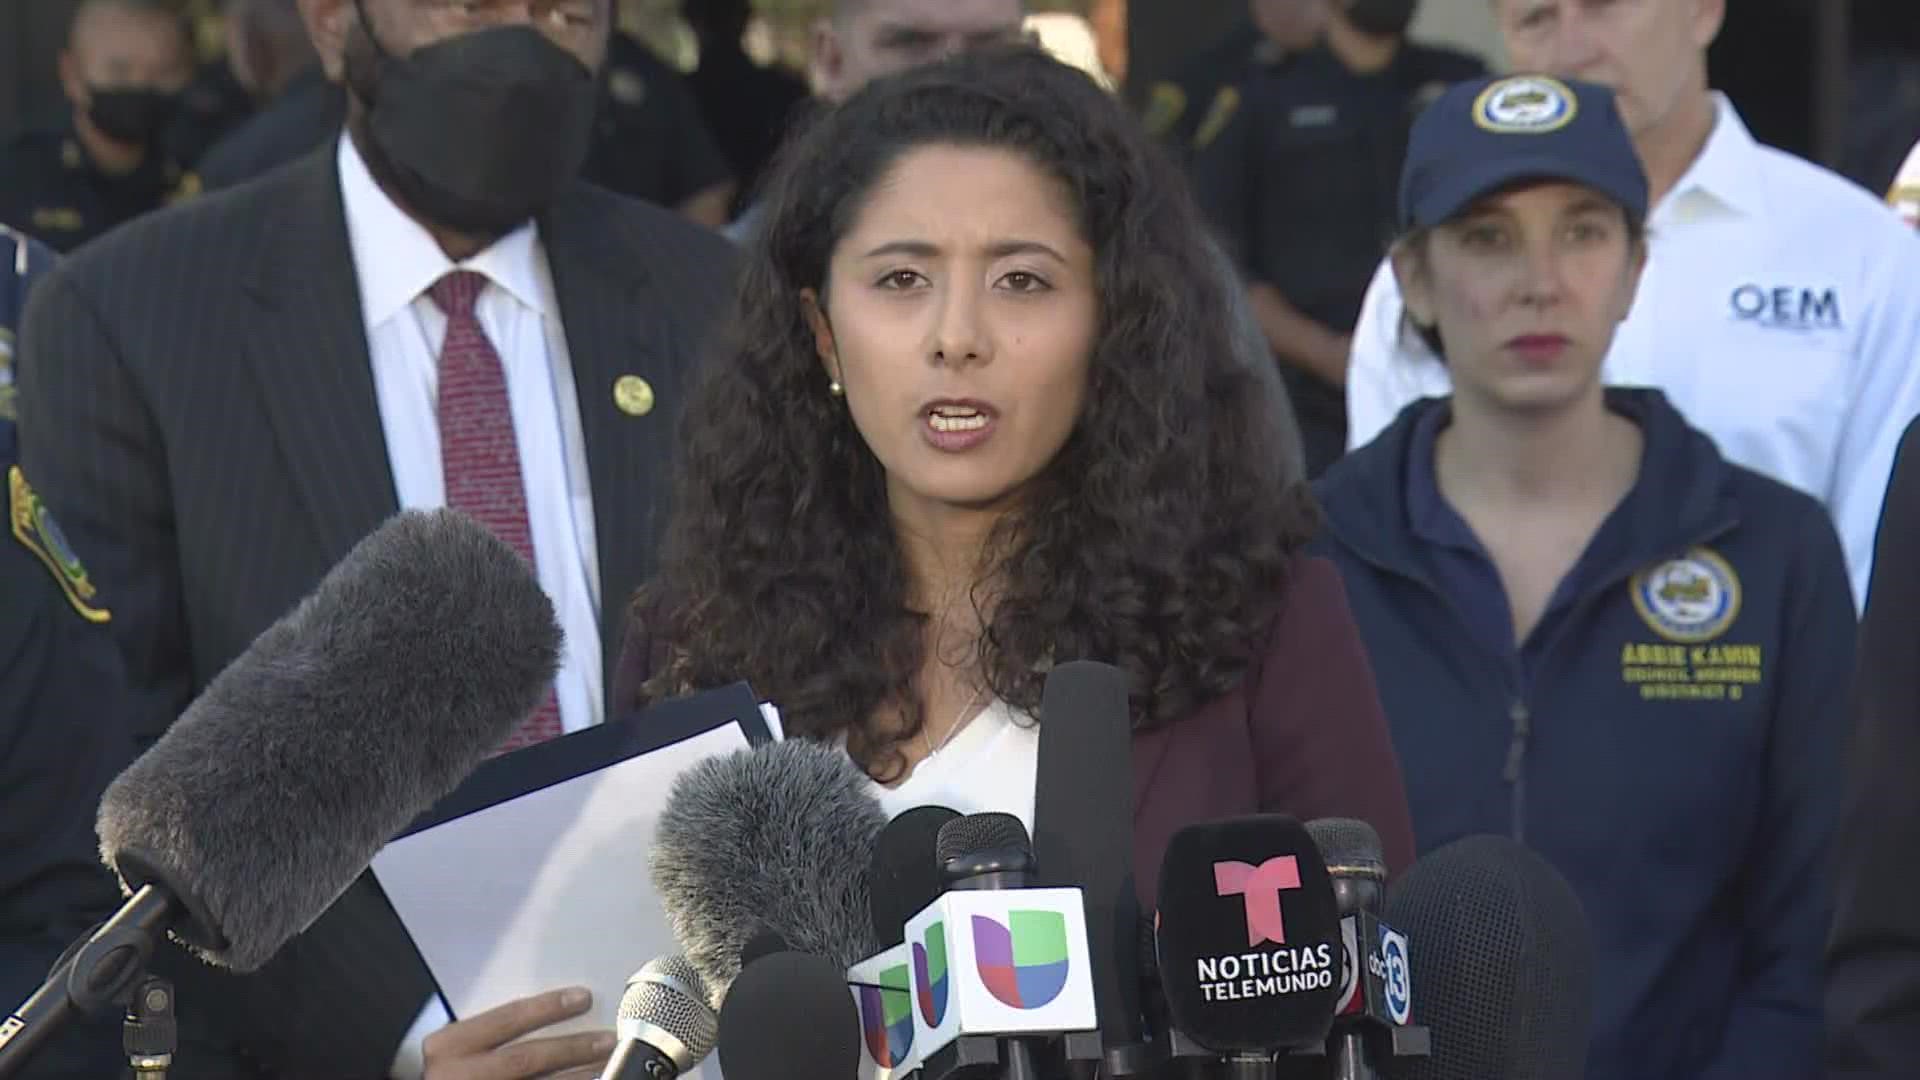 Harris County Judge Lina Hidalgo says she's calling for an independent investigation into the Astroworld Festival crowd surge incident that left eight dead.